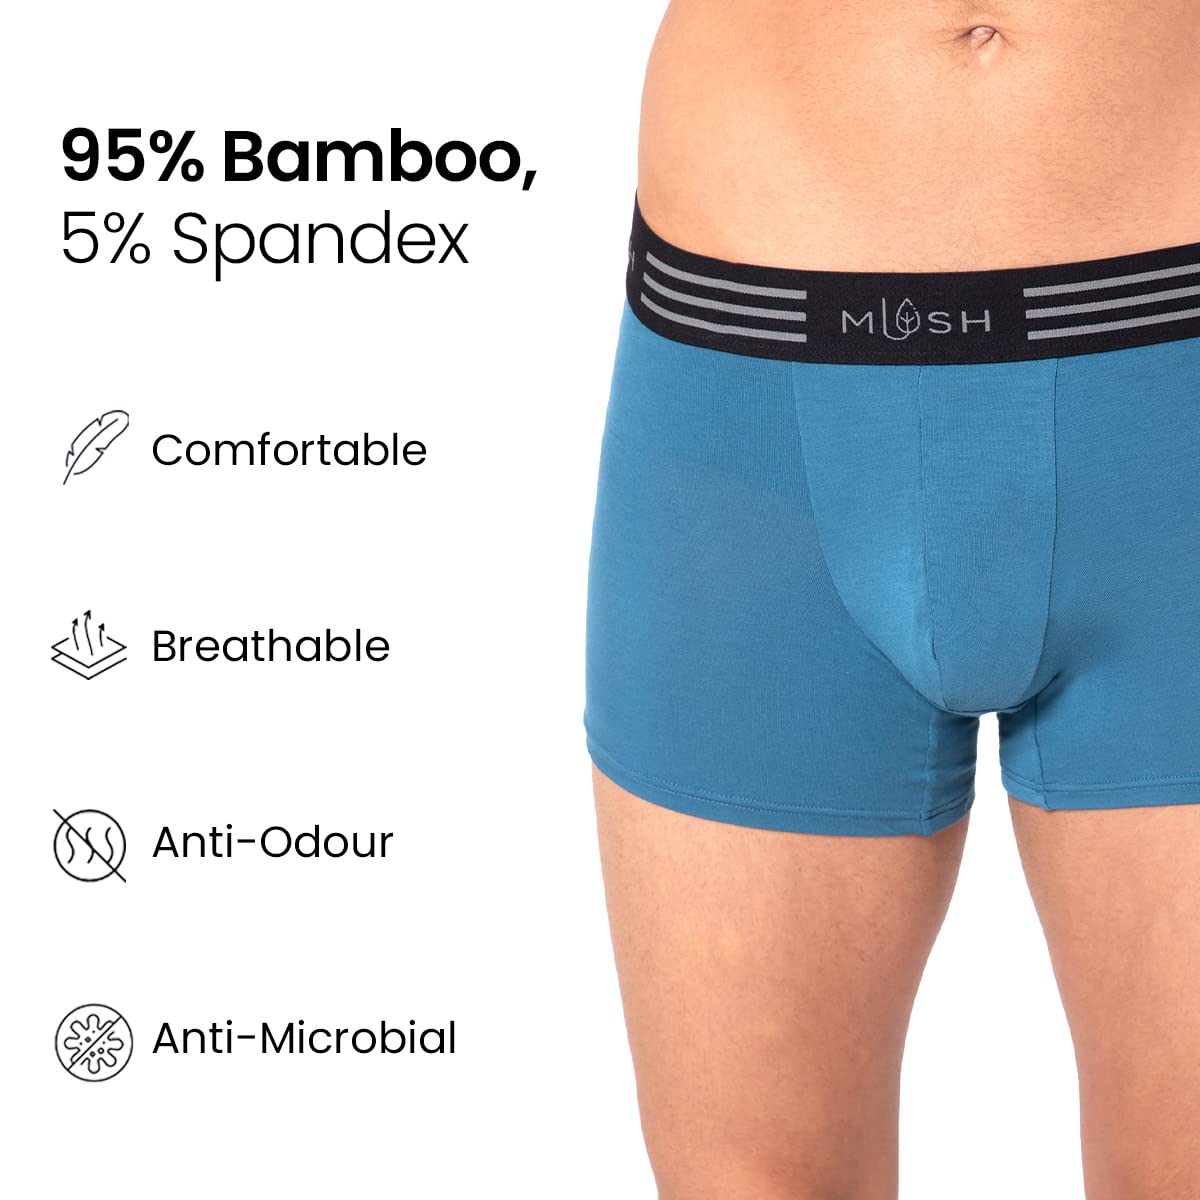 Mush Ultra Soft, Breathable, Feather Light Men's Bamboo Trunk || Naturally Anti-Odor and Anti-Microbial Bamboo Innerwear Pack of 2 (XL, Blue and White)